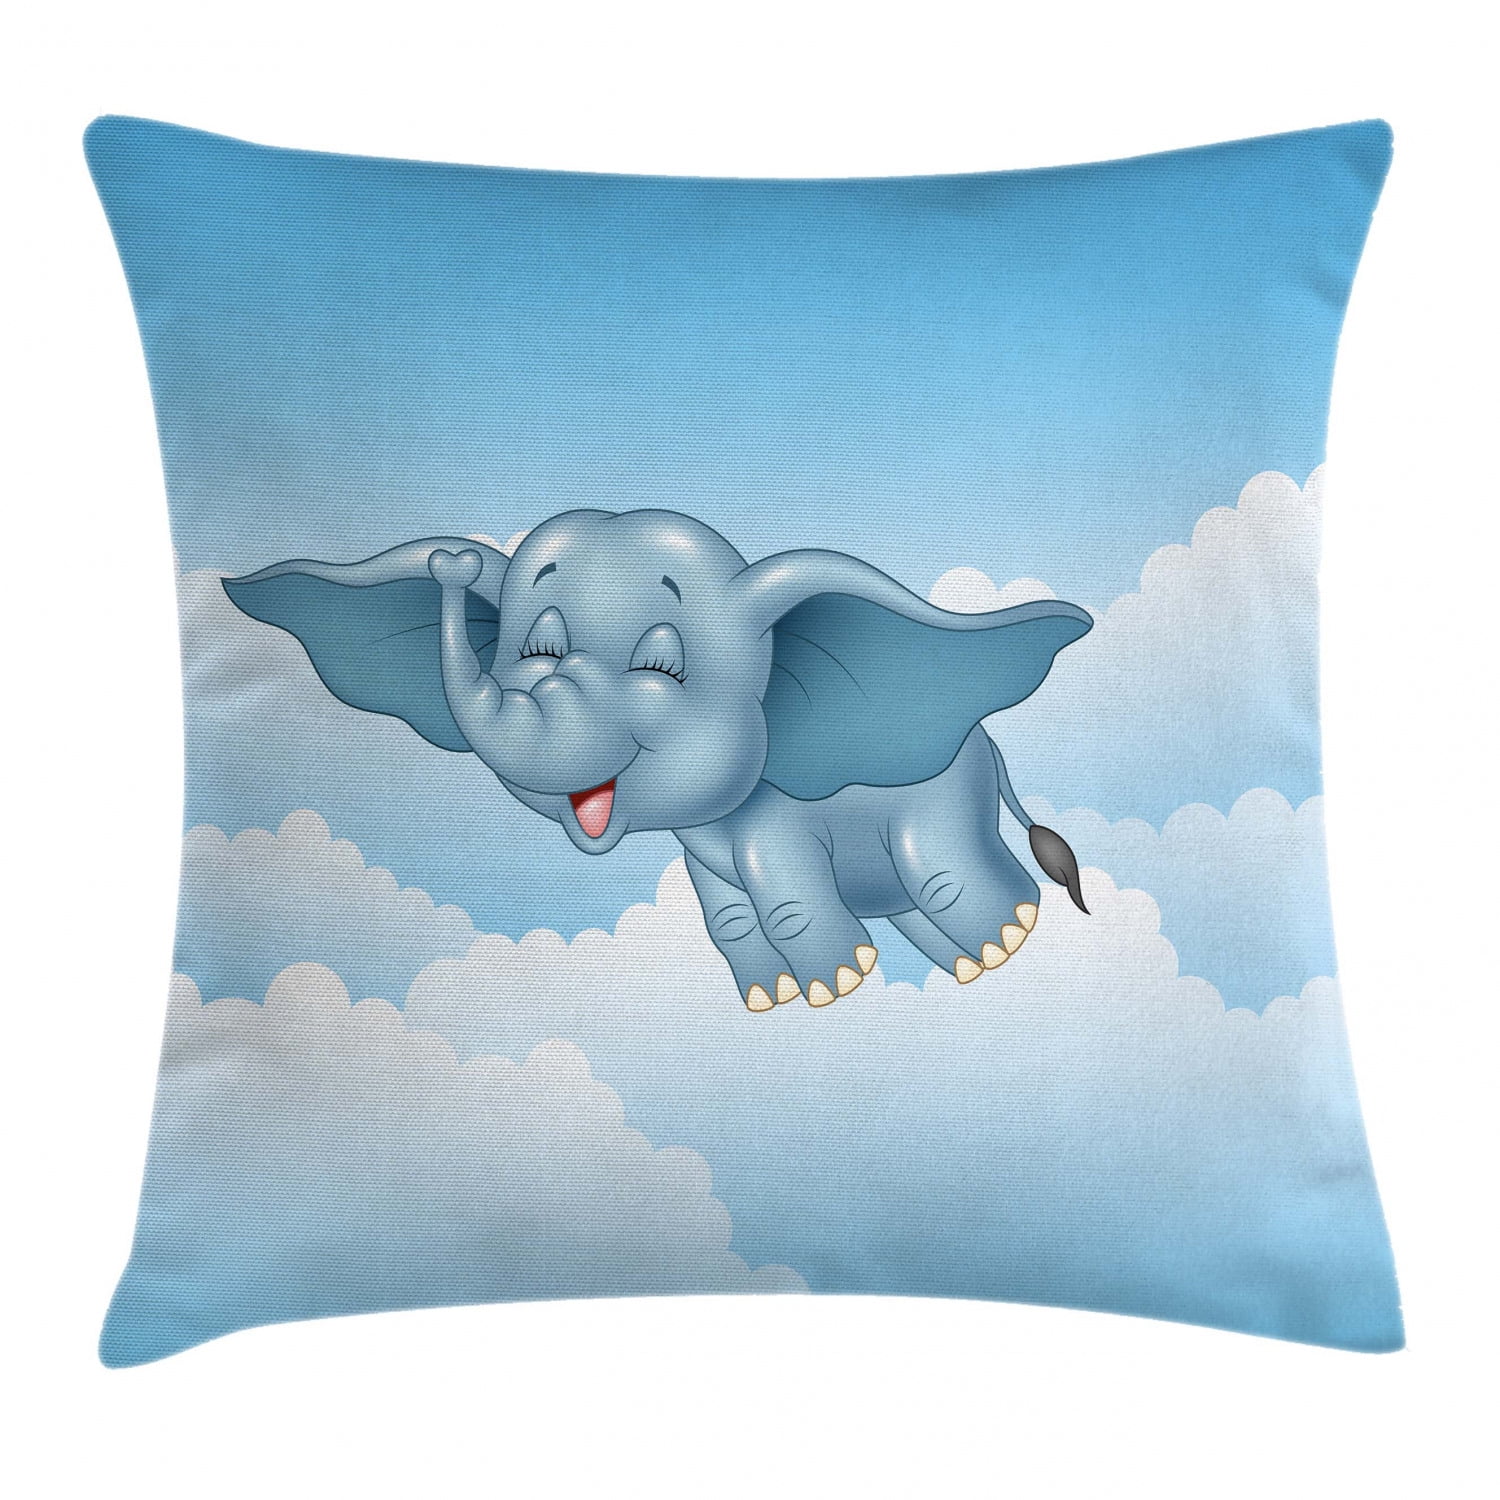 Elephant Cushion 45X45cmExtra Large Floor Pillow Cover Square Pet Dog Bed Covers